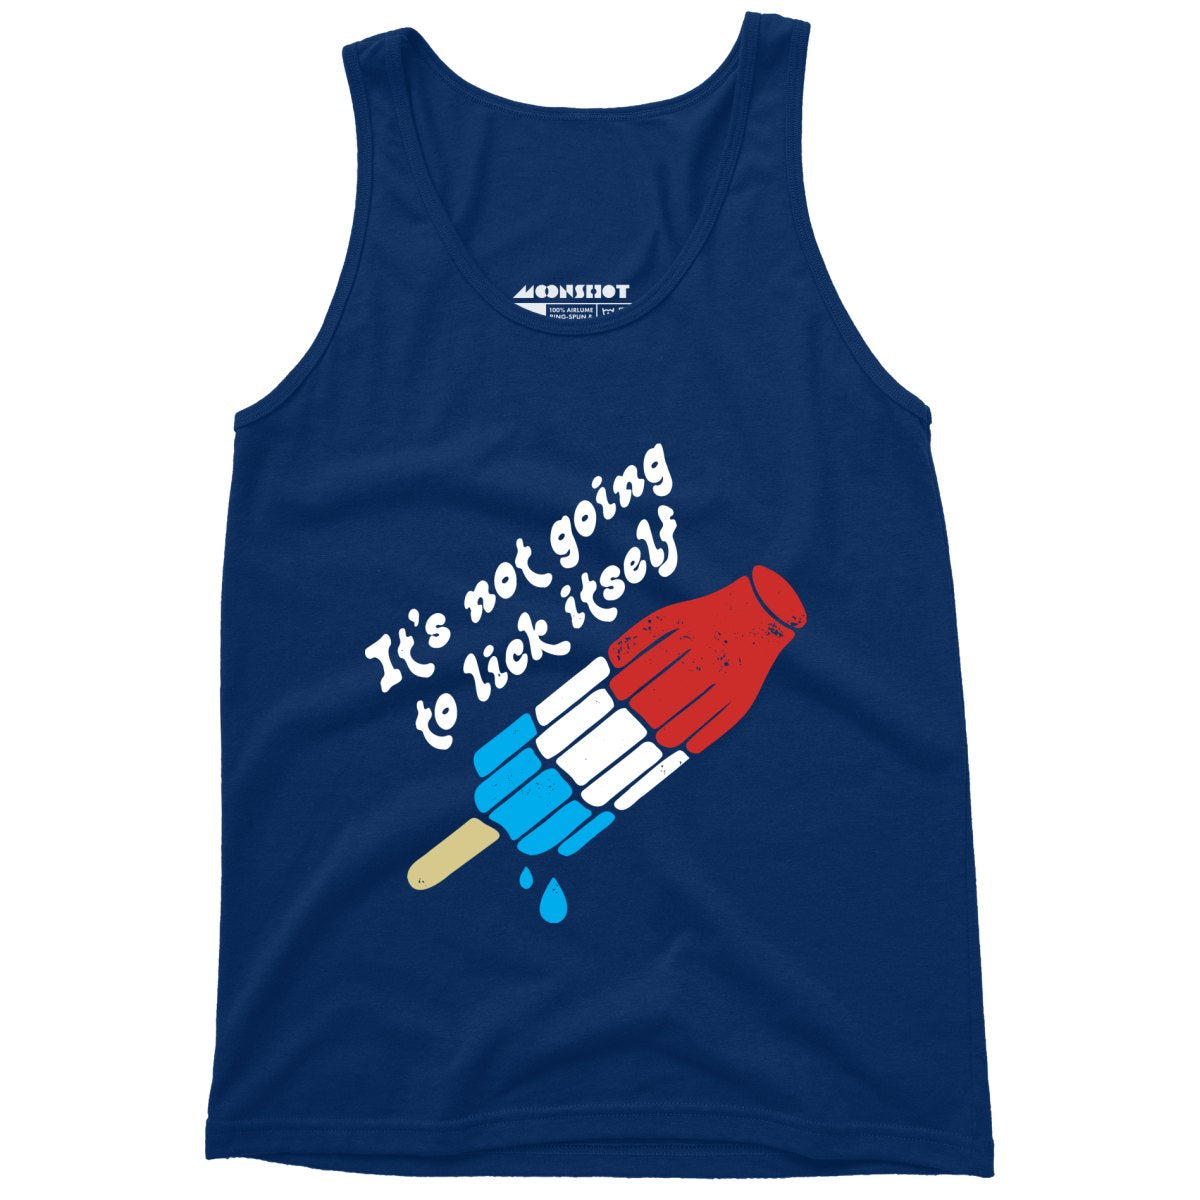 It's Not Going to Lick Itself - Unisex Tank Top